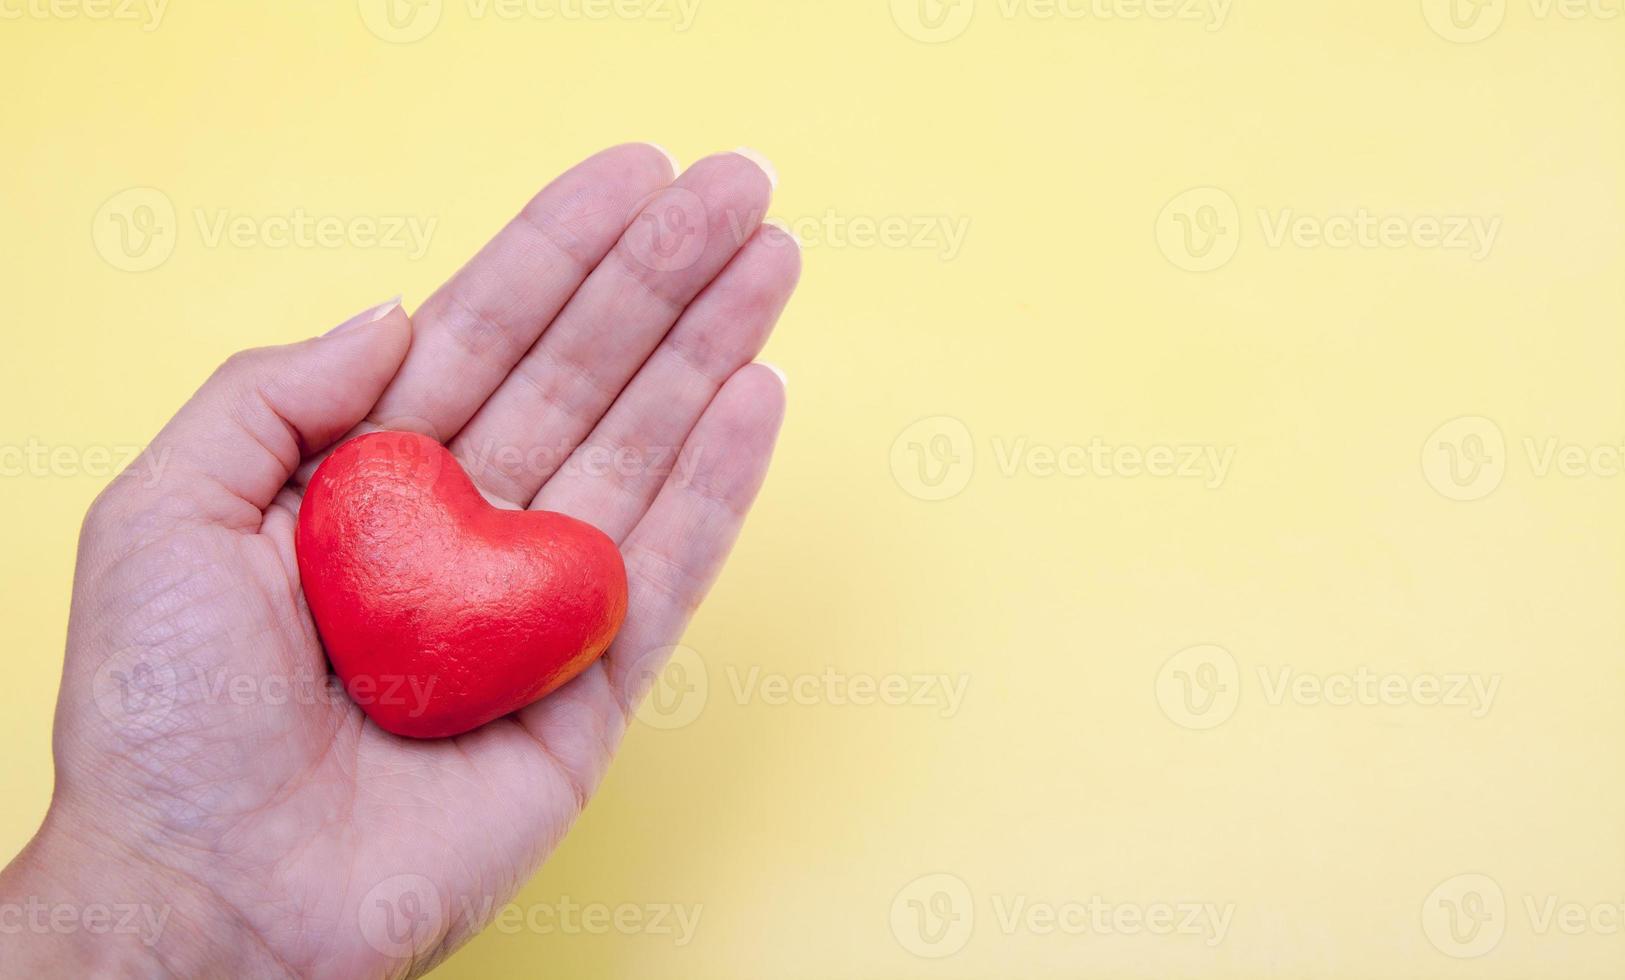 Red heart in hand on a yellow background with copy space. International Charity Day, Donation Concept photo